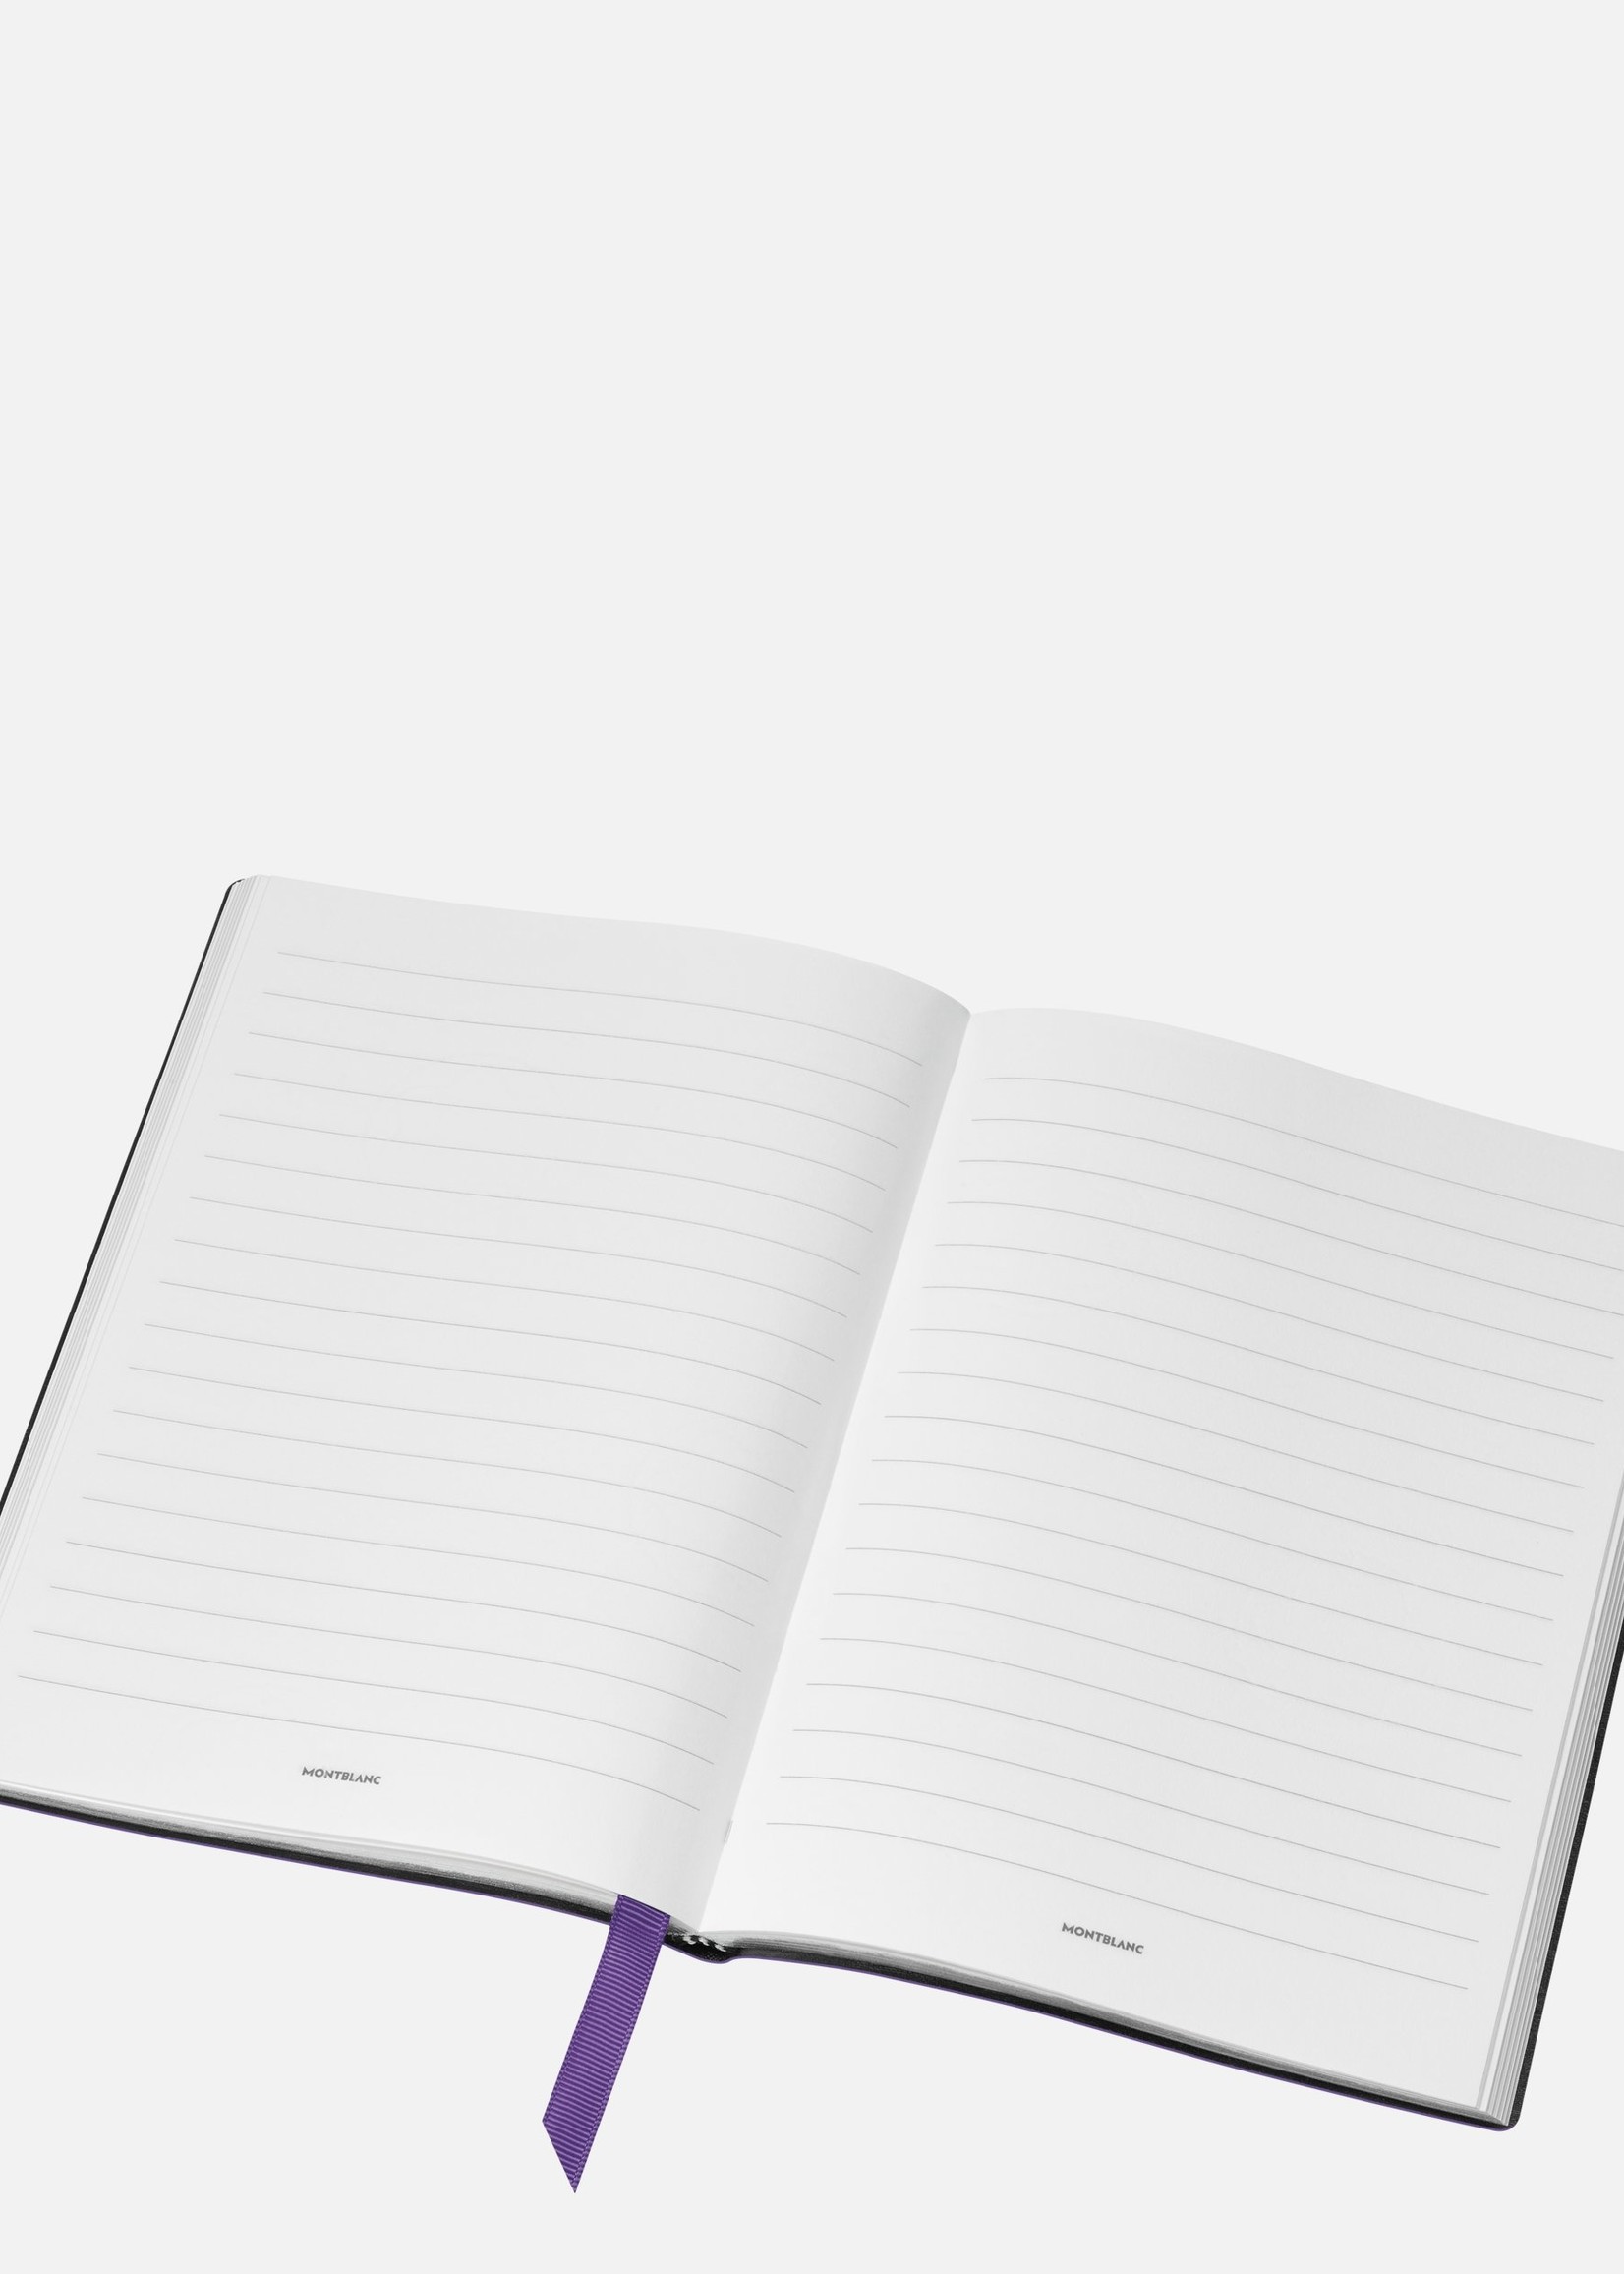 MONTBLANC Notebook #146 lined Sartorial Purple